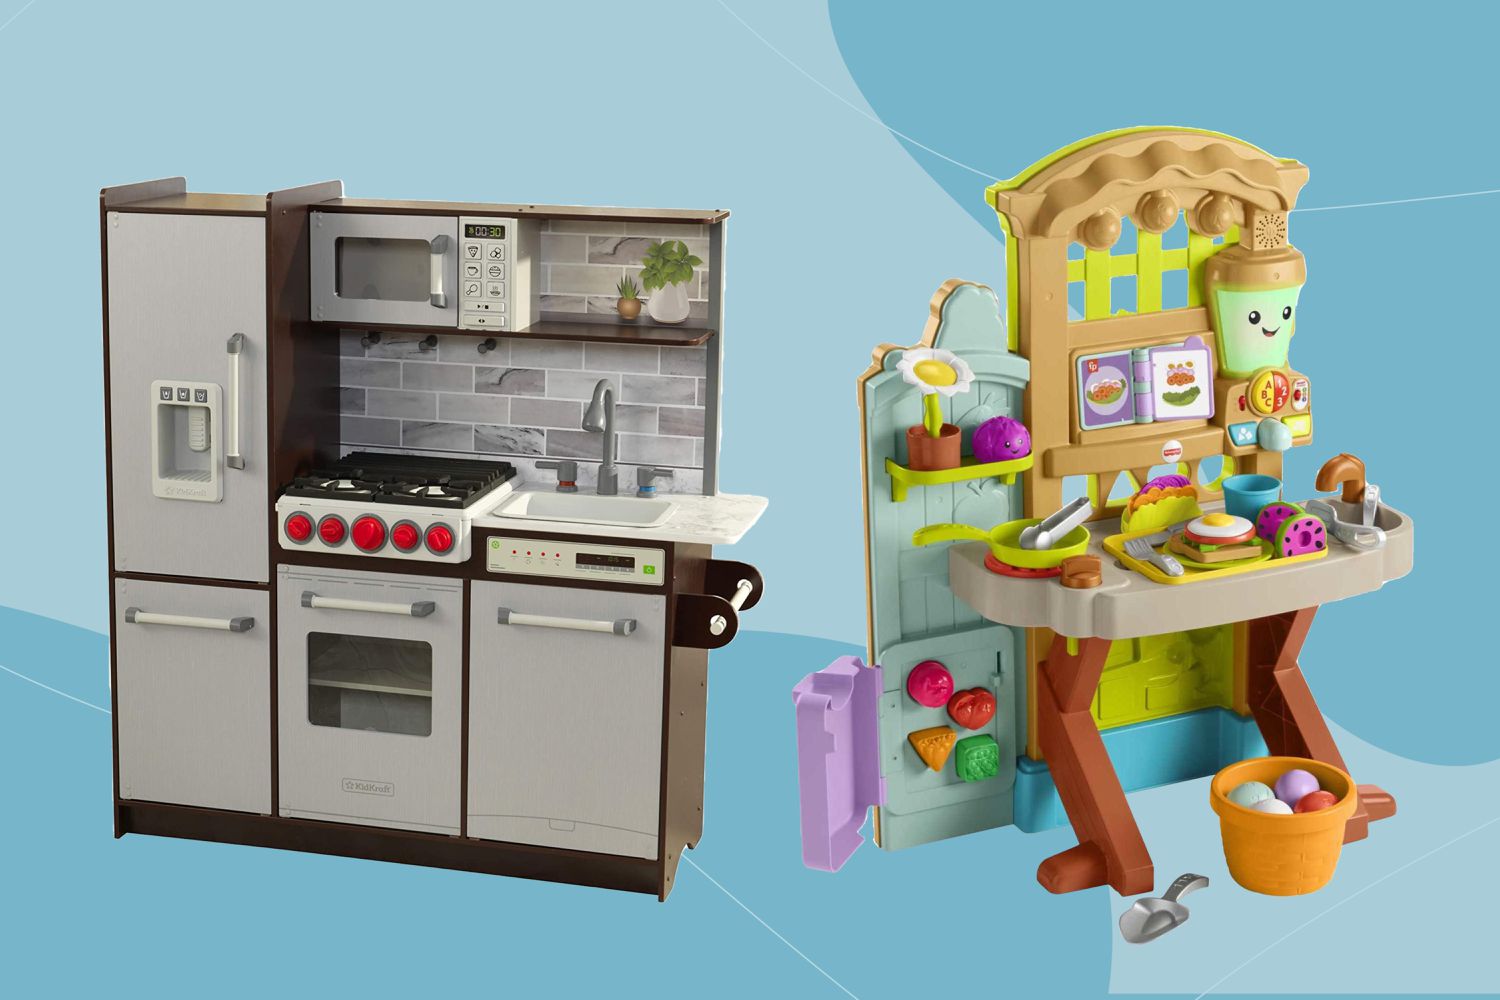 Plastic or Wooden, which play kitchen should I buy?